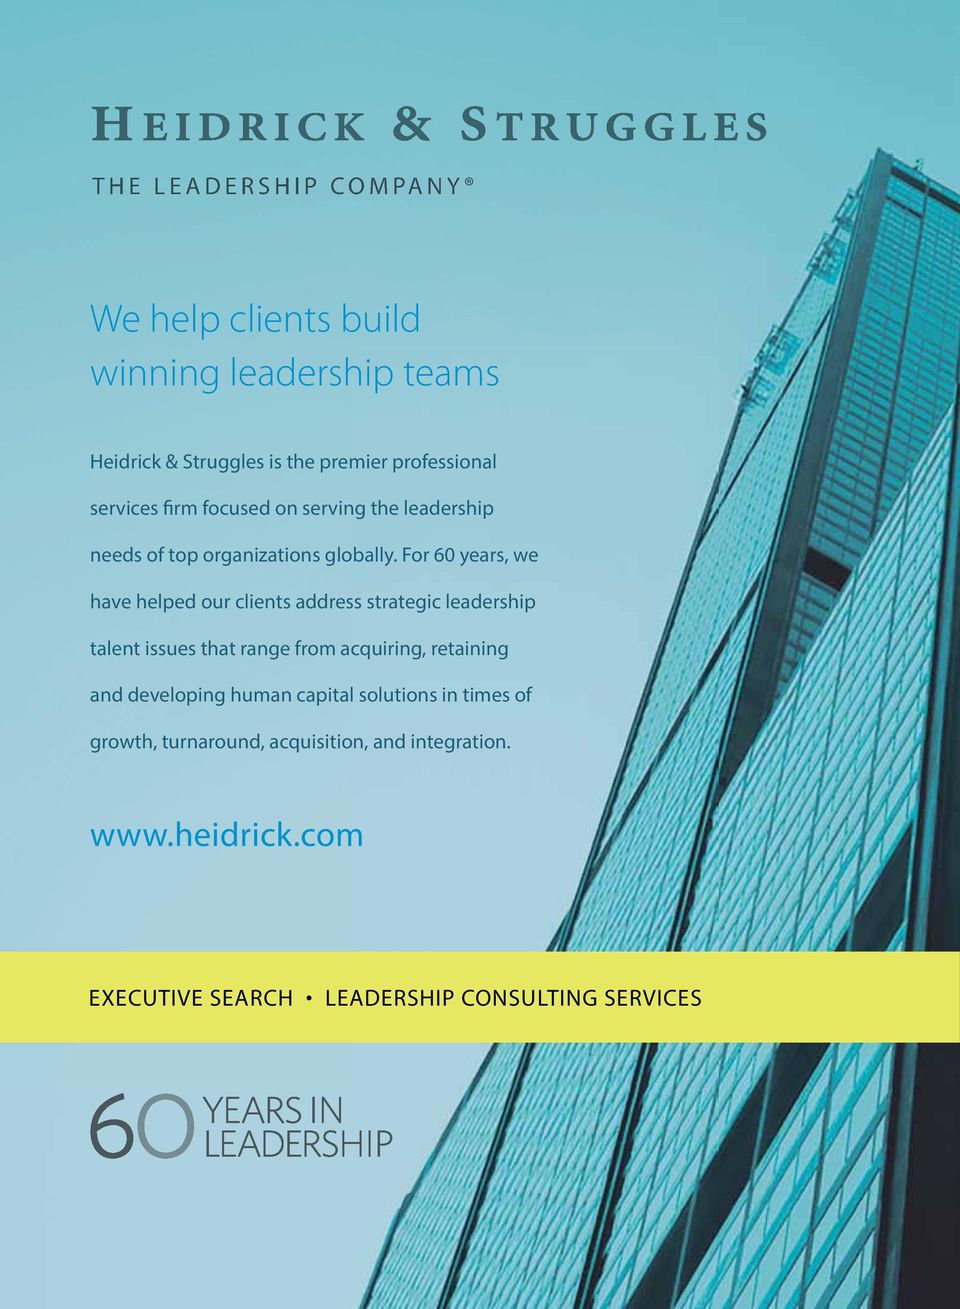 For 60 years, we have helped our clients address strategic leadership talent issues that range from acquiring, retaining and